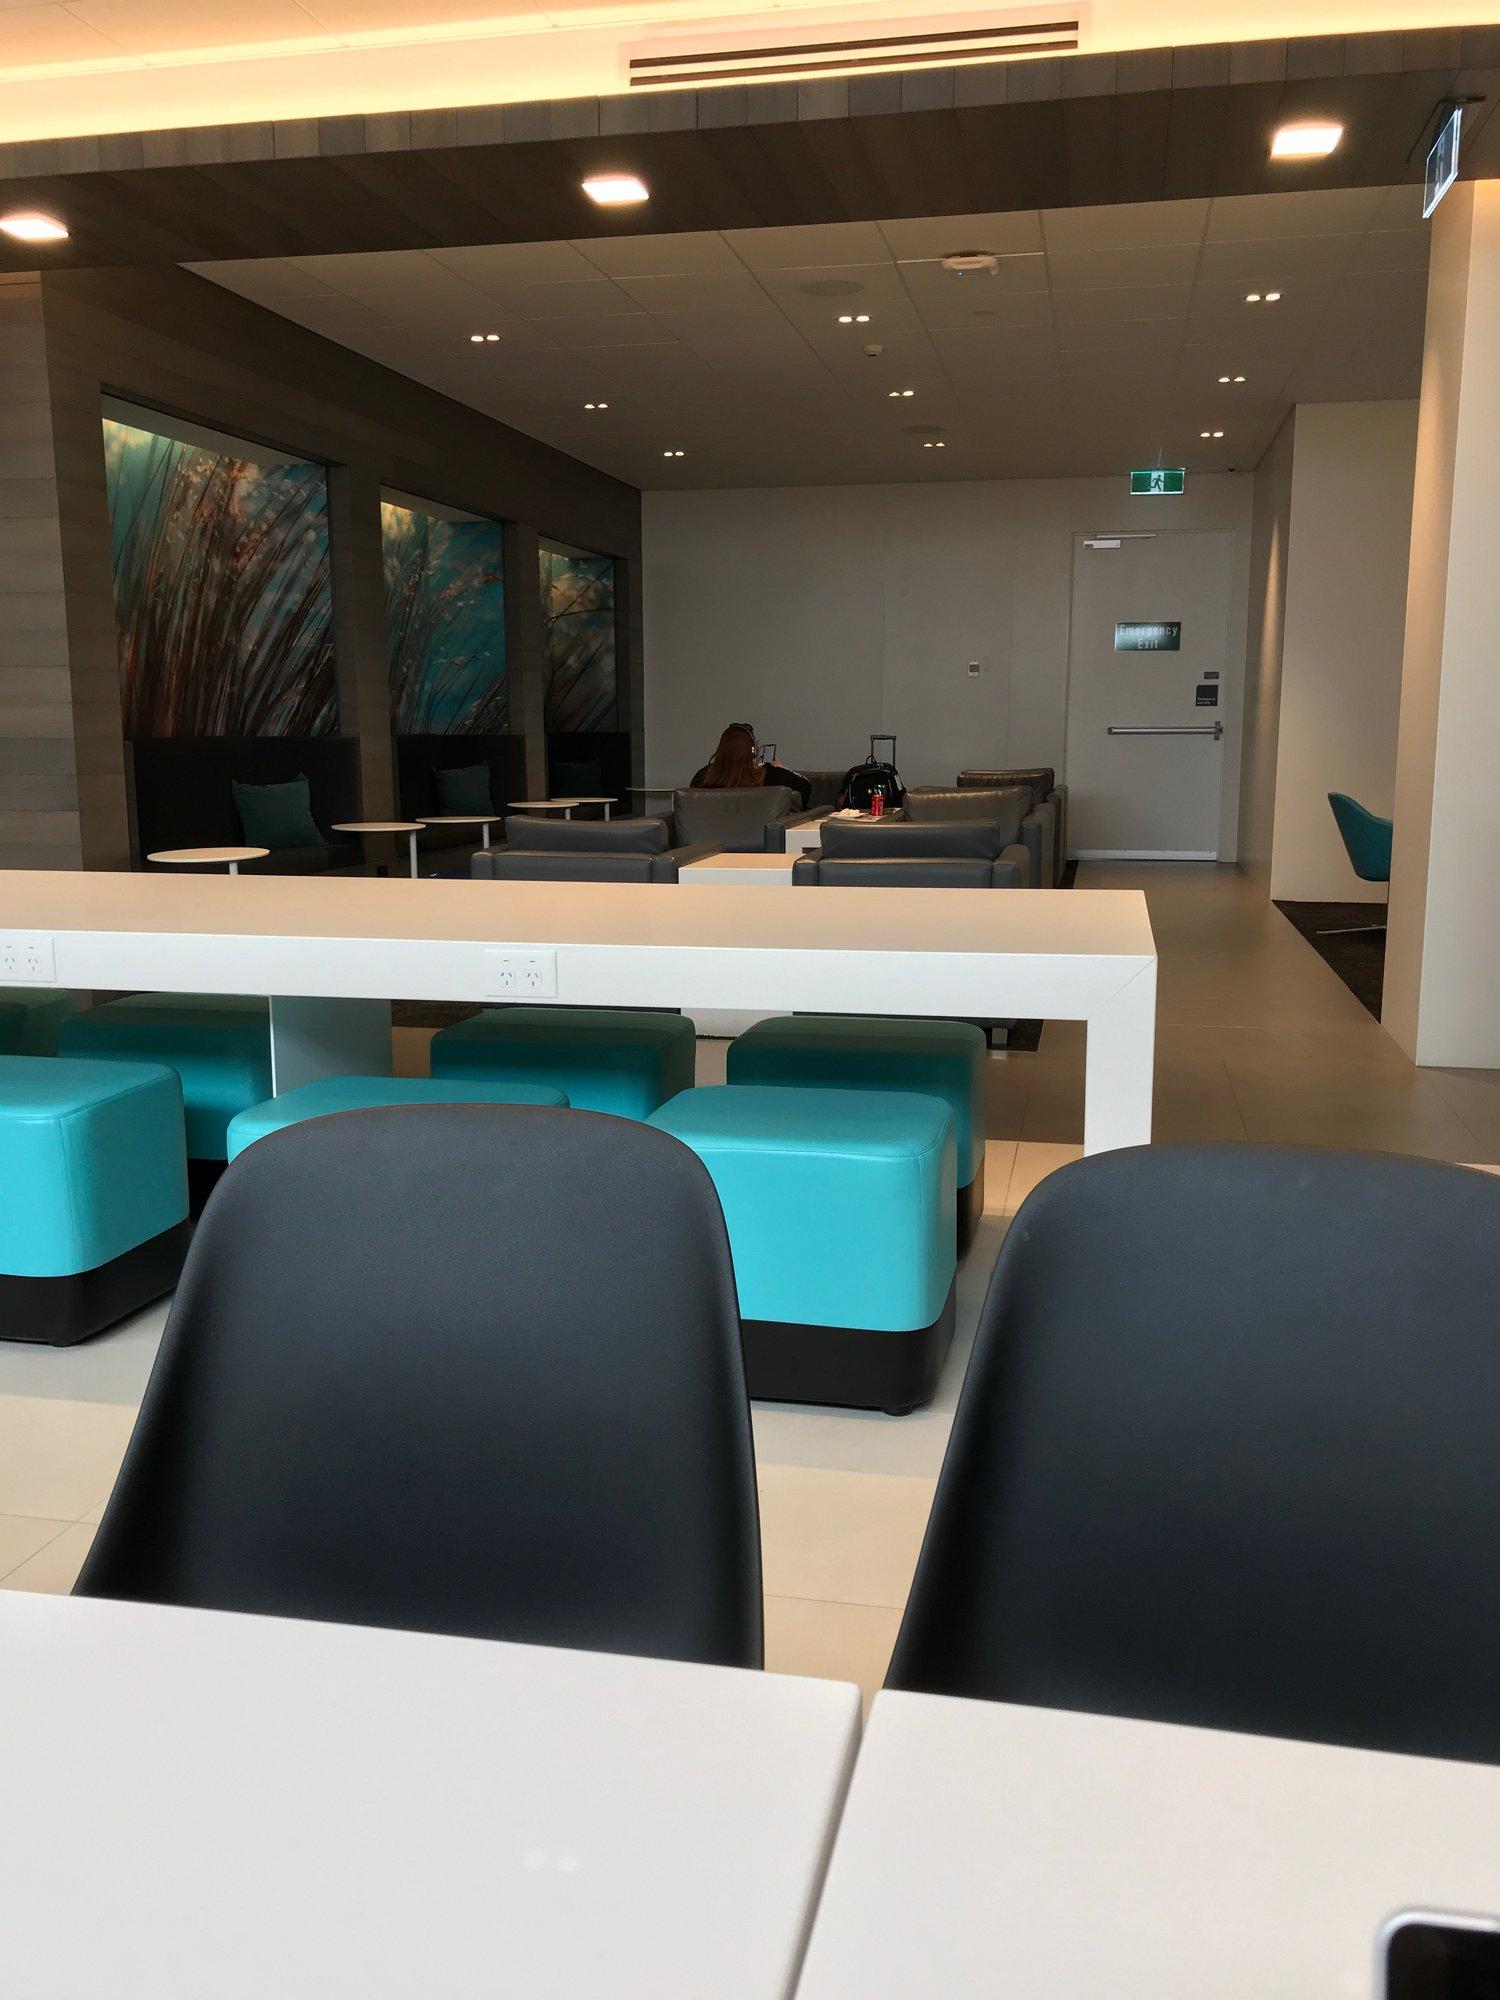 Air New Zealand Regional Lounge image 1 of 3